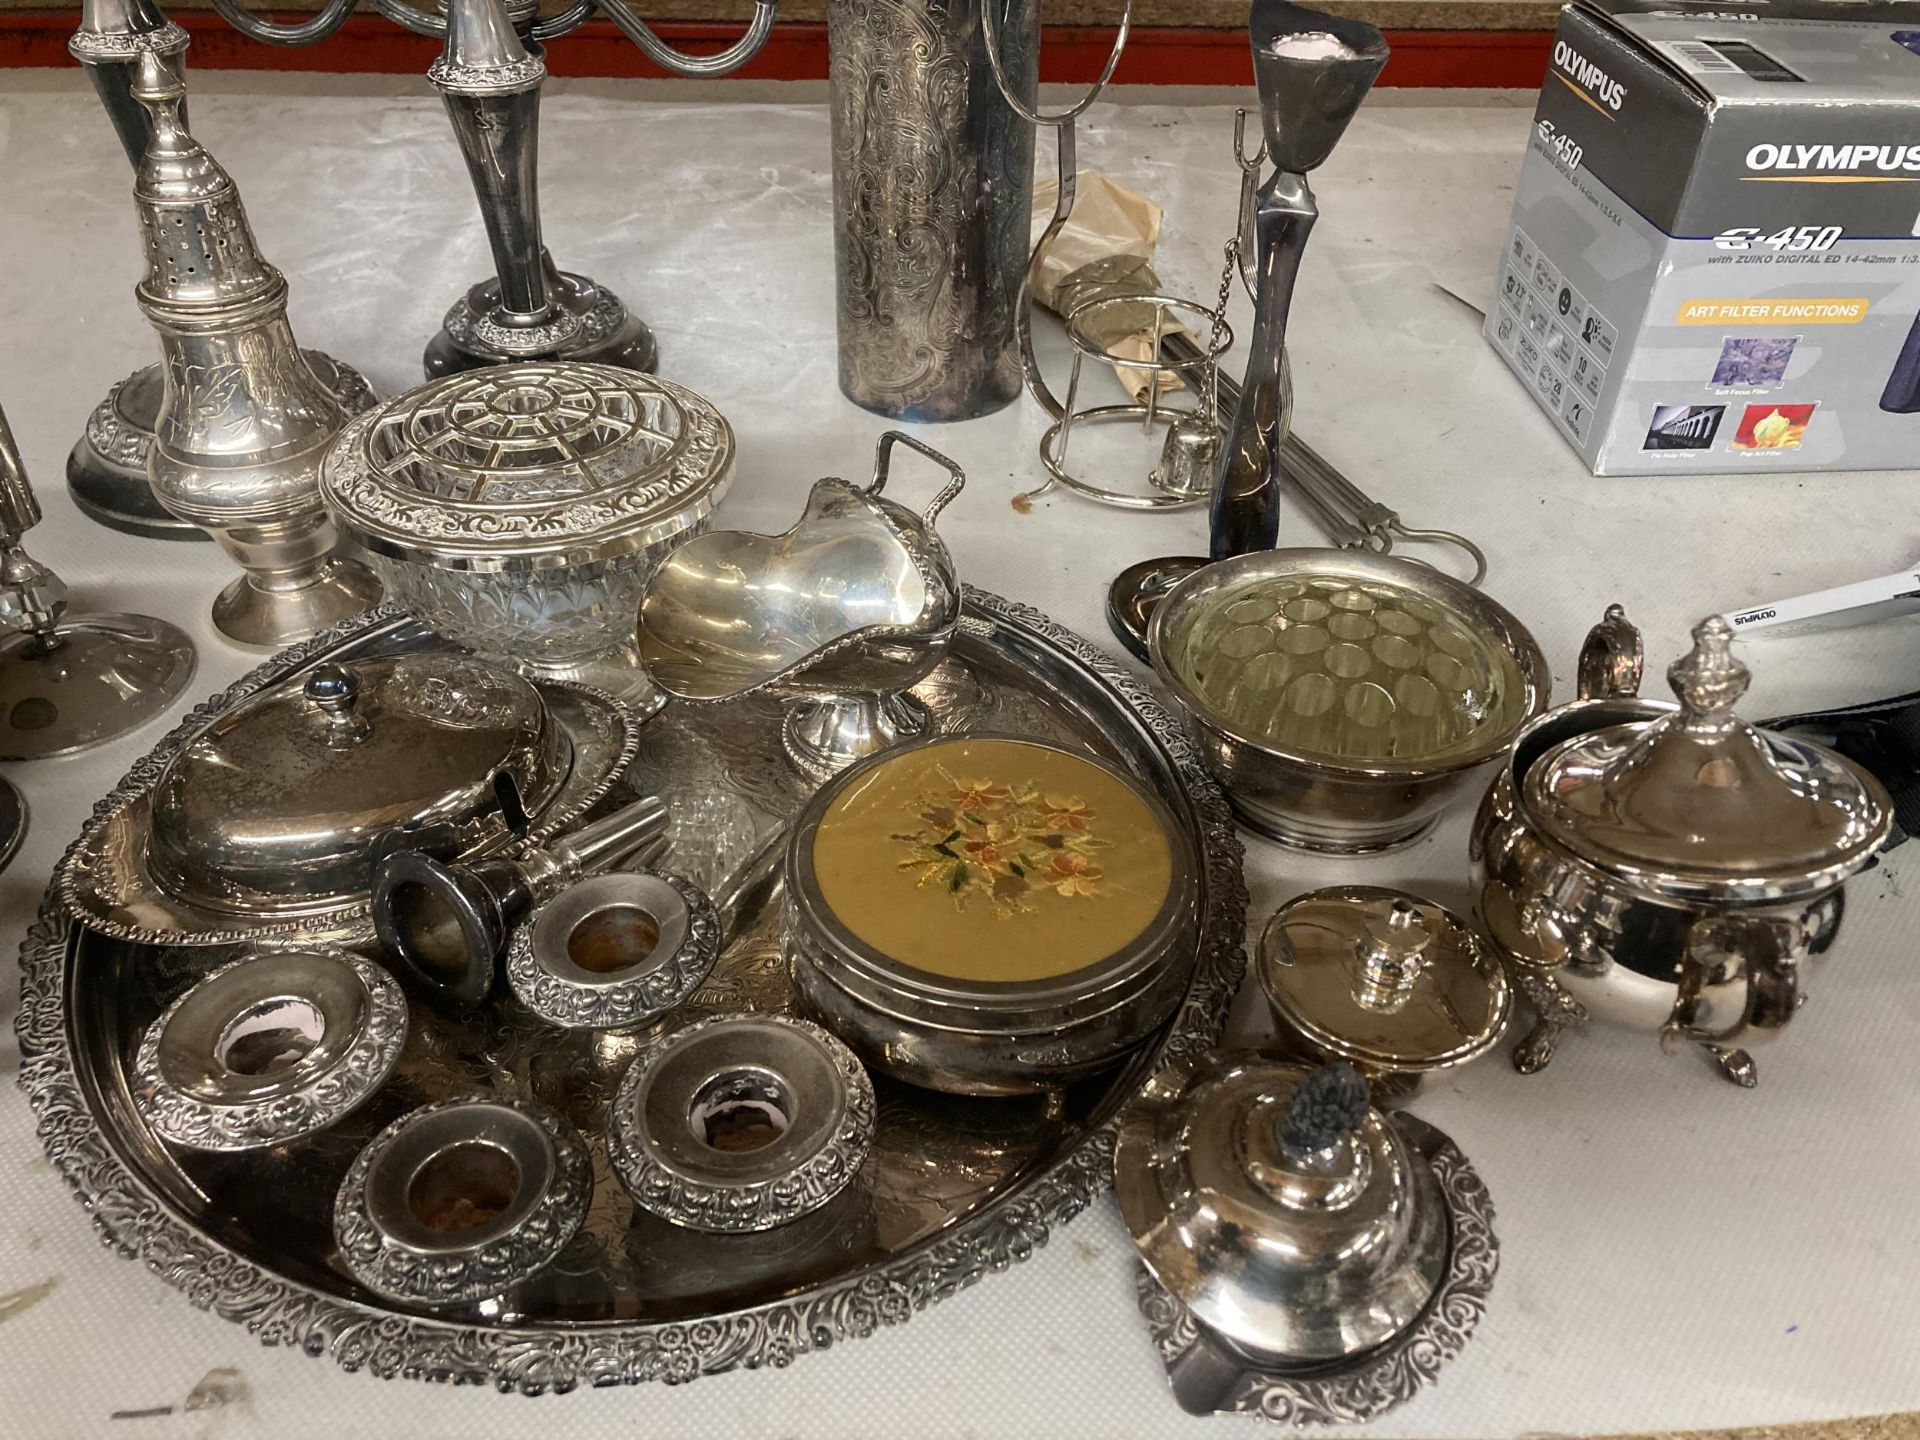 A LARGE QUANTITY OF SILVER PLATED ITEMS TO INCLUDE A CANDLEABRA, CANDLESTICKS, TRAY, ROSE BOWLS, - Image 3 of 4